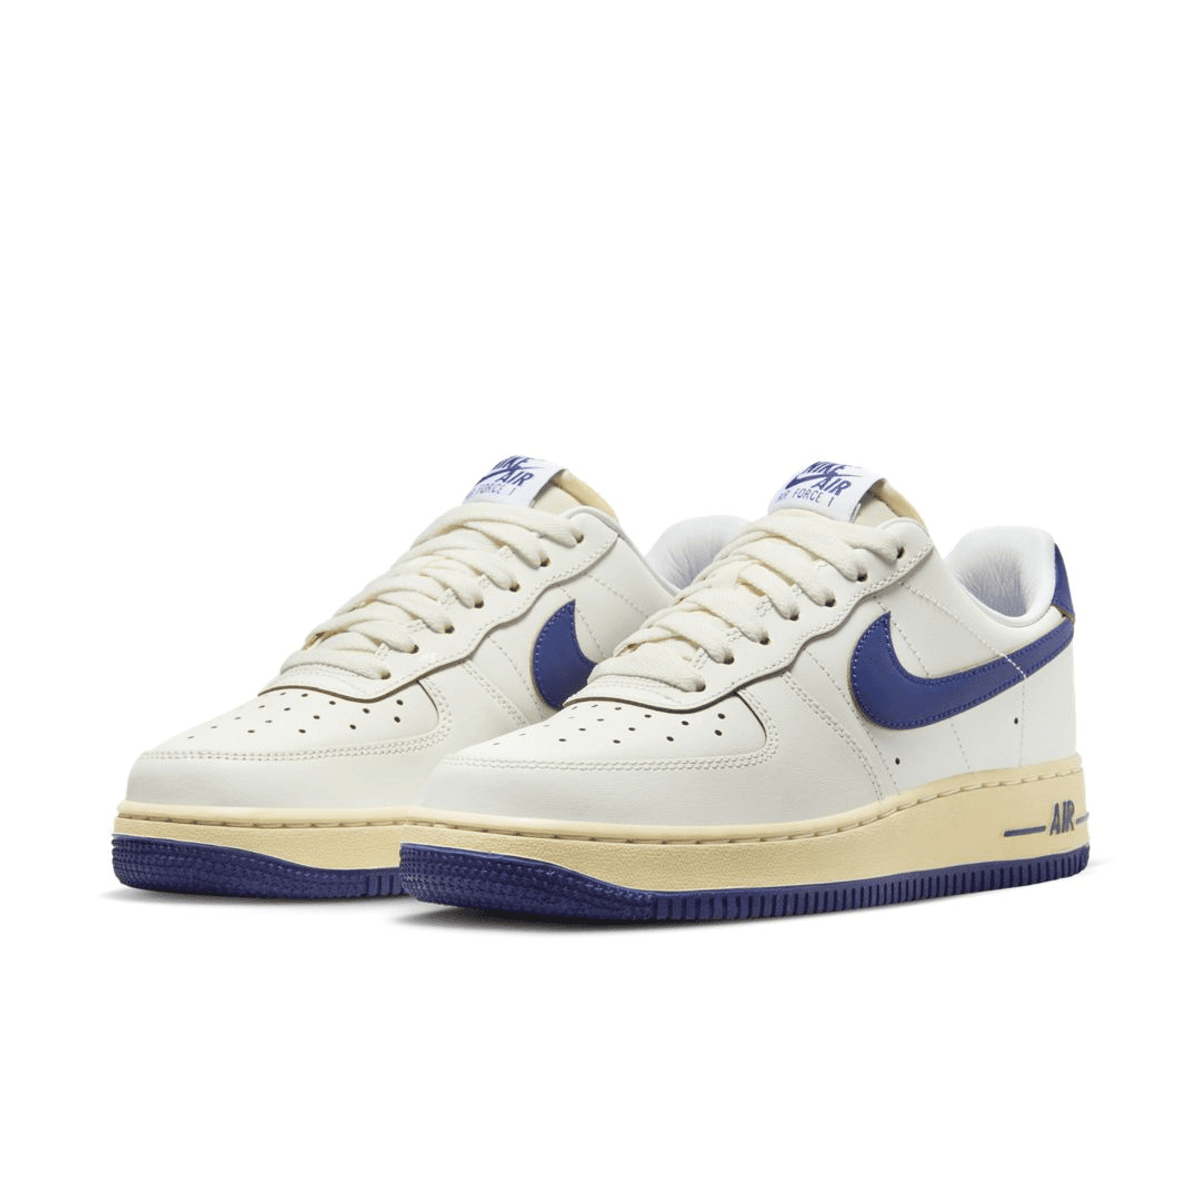 Nike Air Force 1 “Athletic Department” Pays Tribute To The Brands Roots